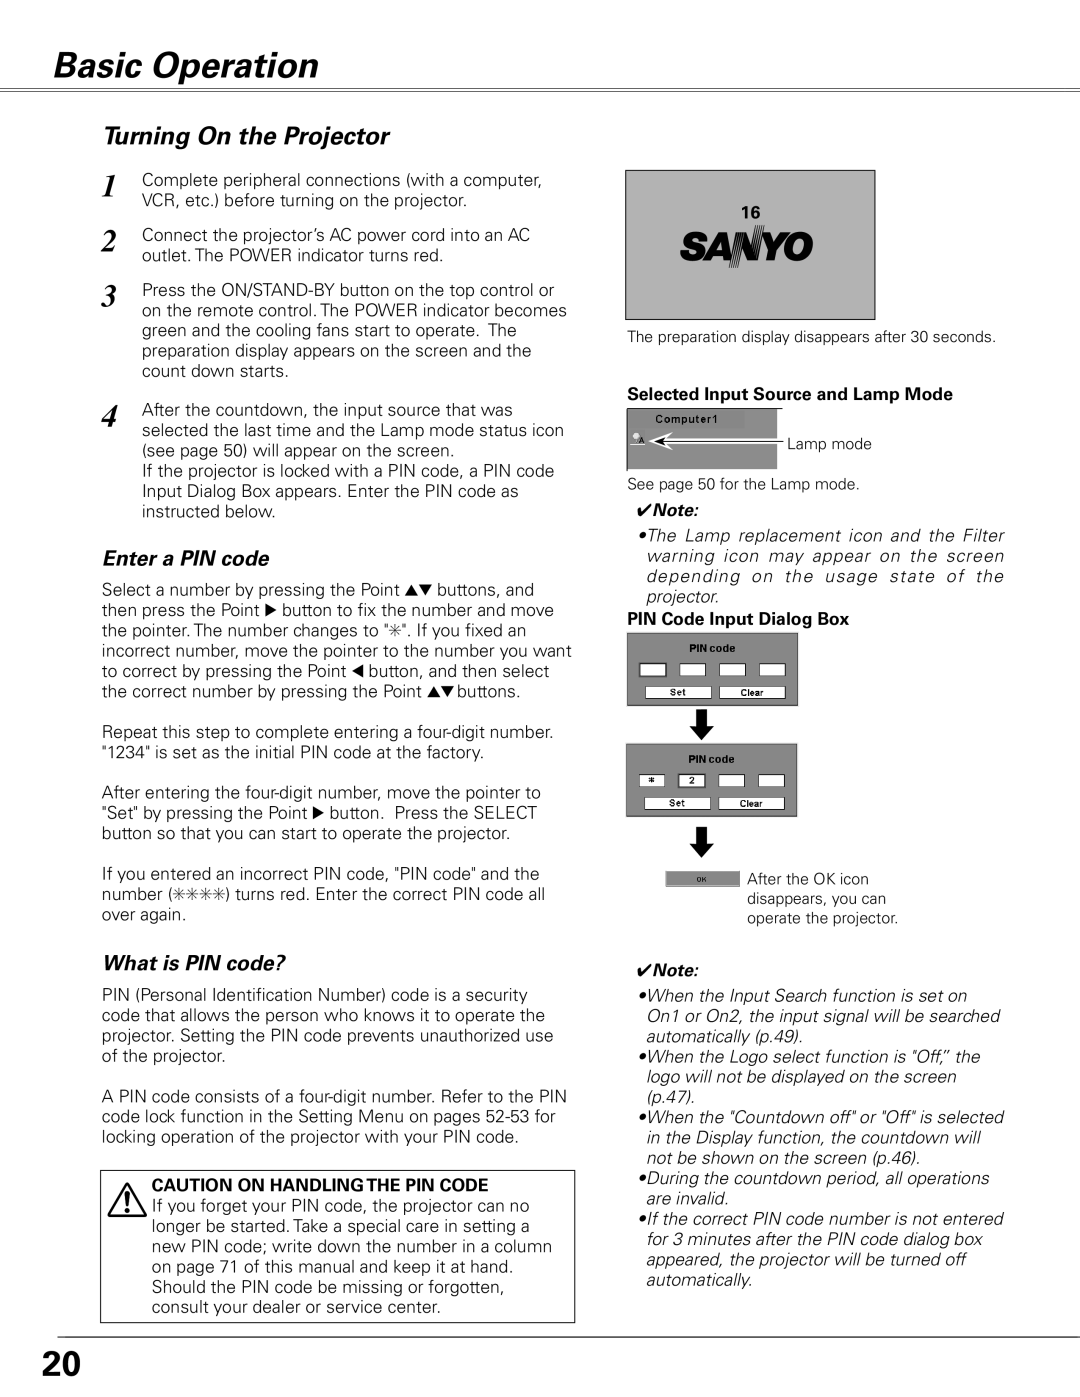 Sanyo PLC-XL50A Basic Operation, Turning On the Projector, Enter a PIN code, What is PIN code?, PIN Code Input Dialog Box 